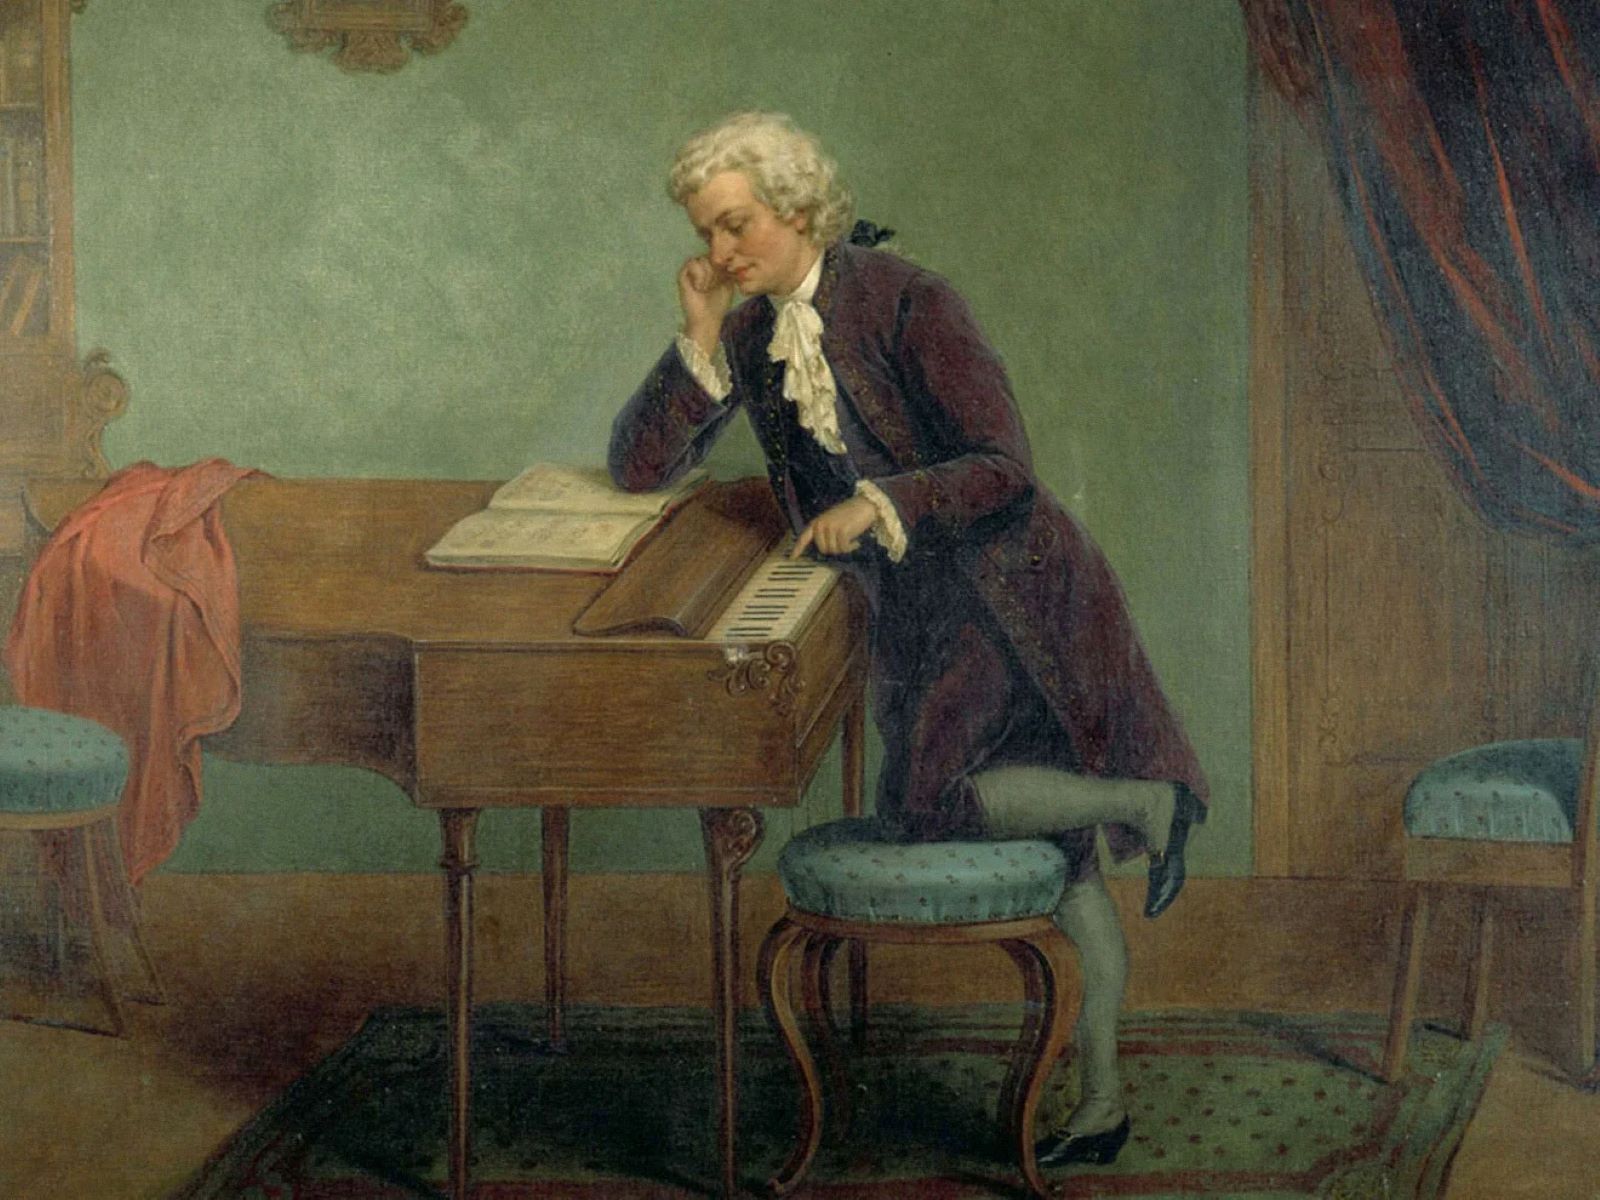 Mozart’s Surprising Musical Talents Revealed!